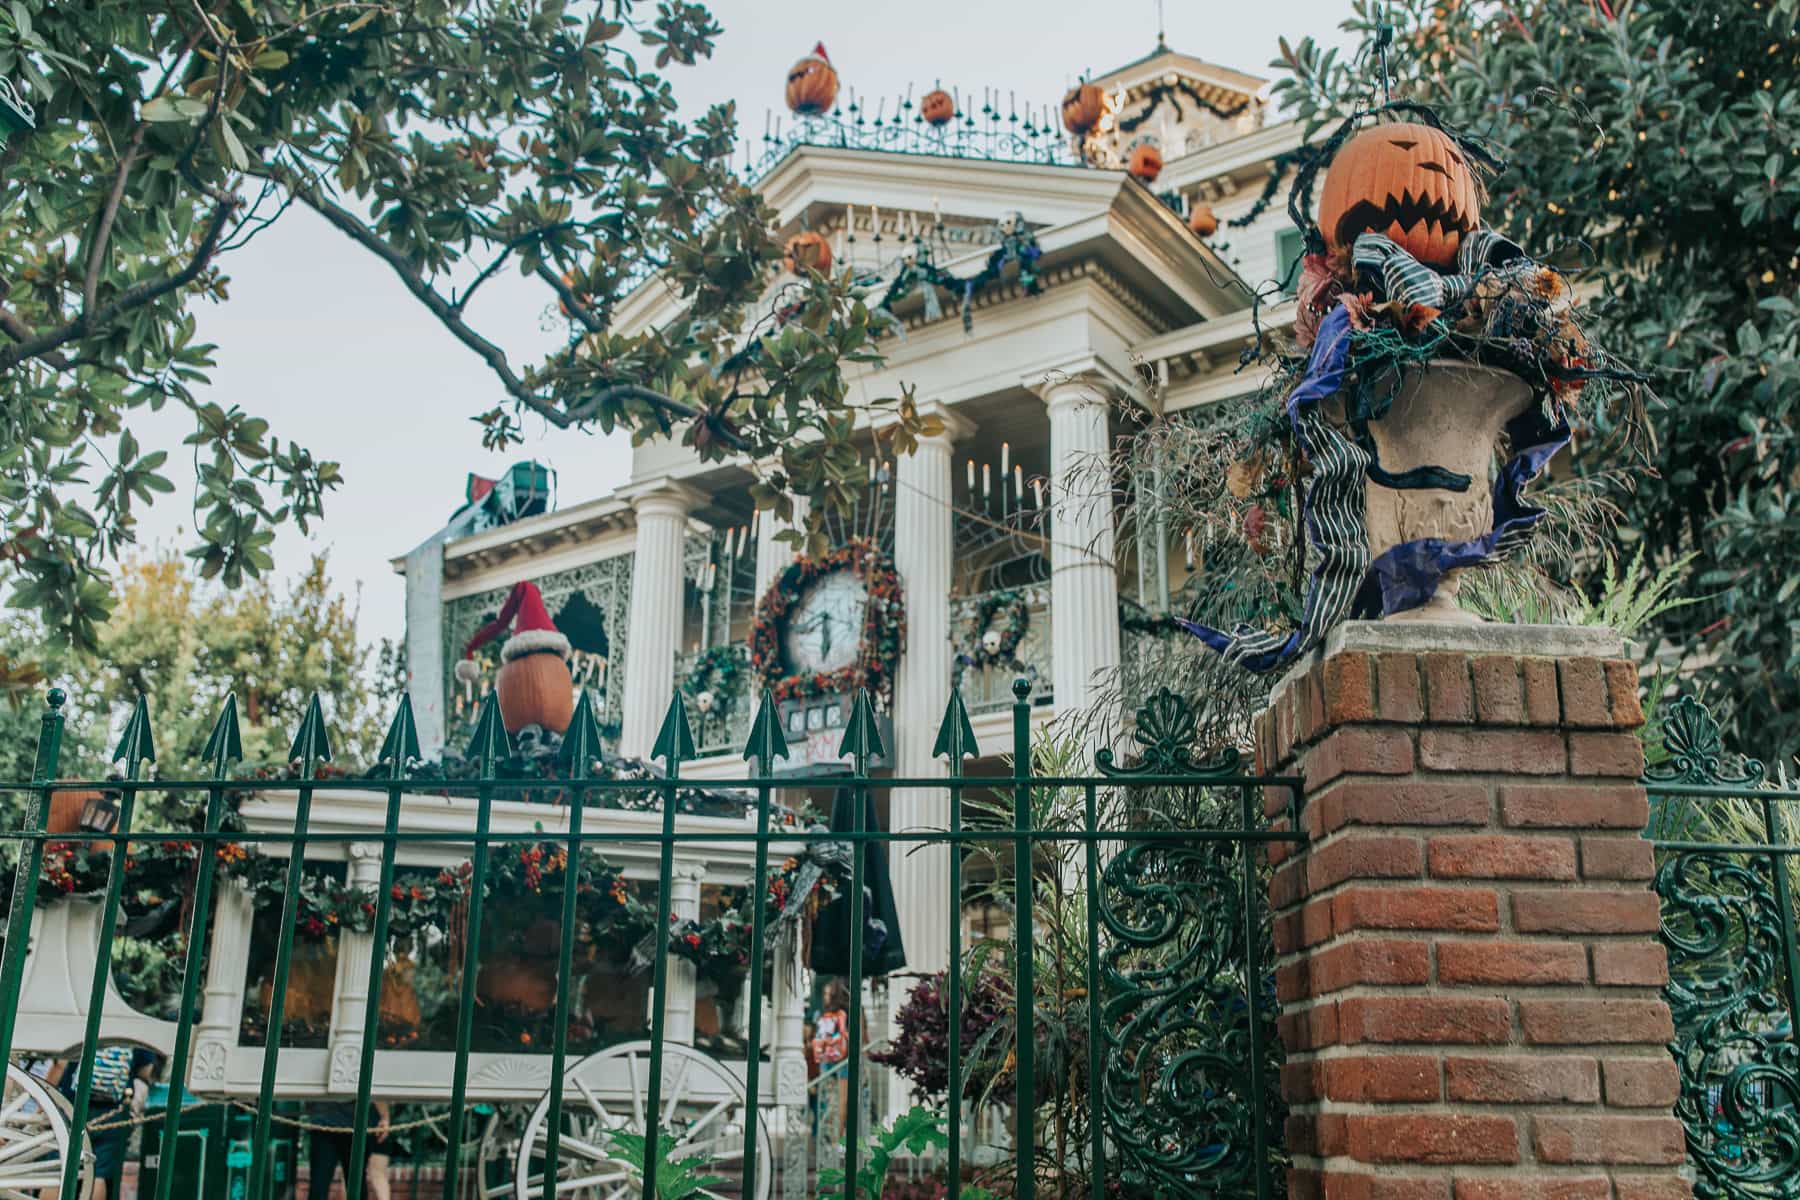 Decorations outside Disney's haunted mansion at Halloween.